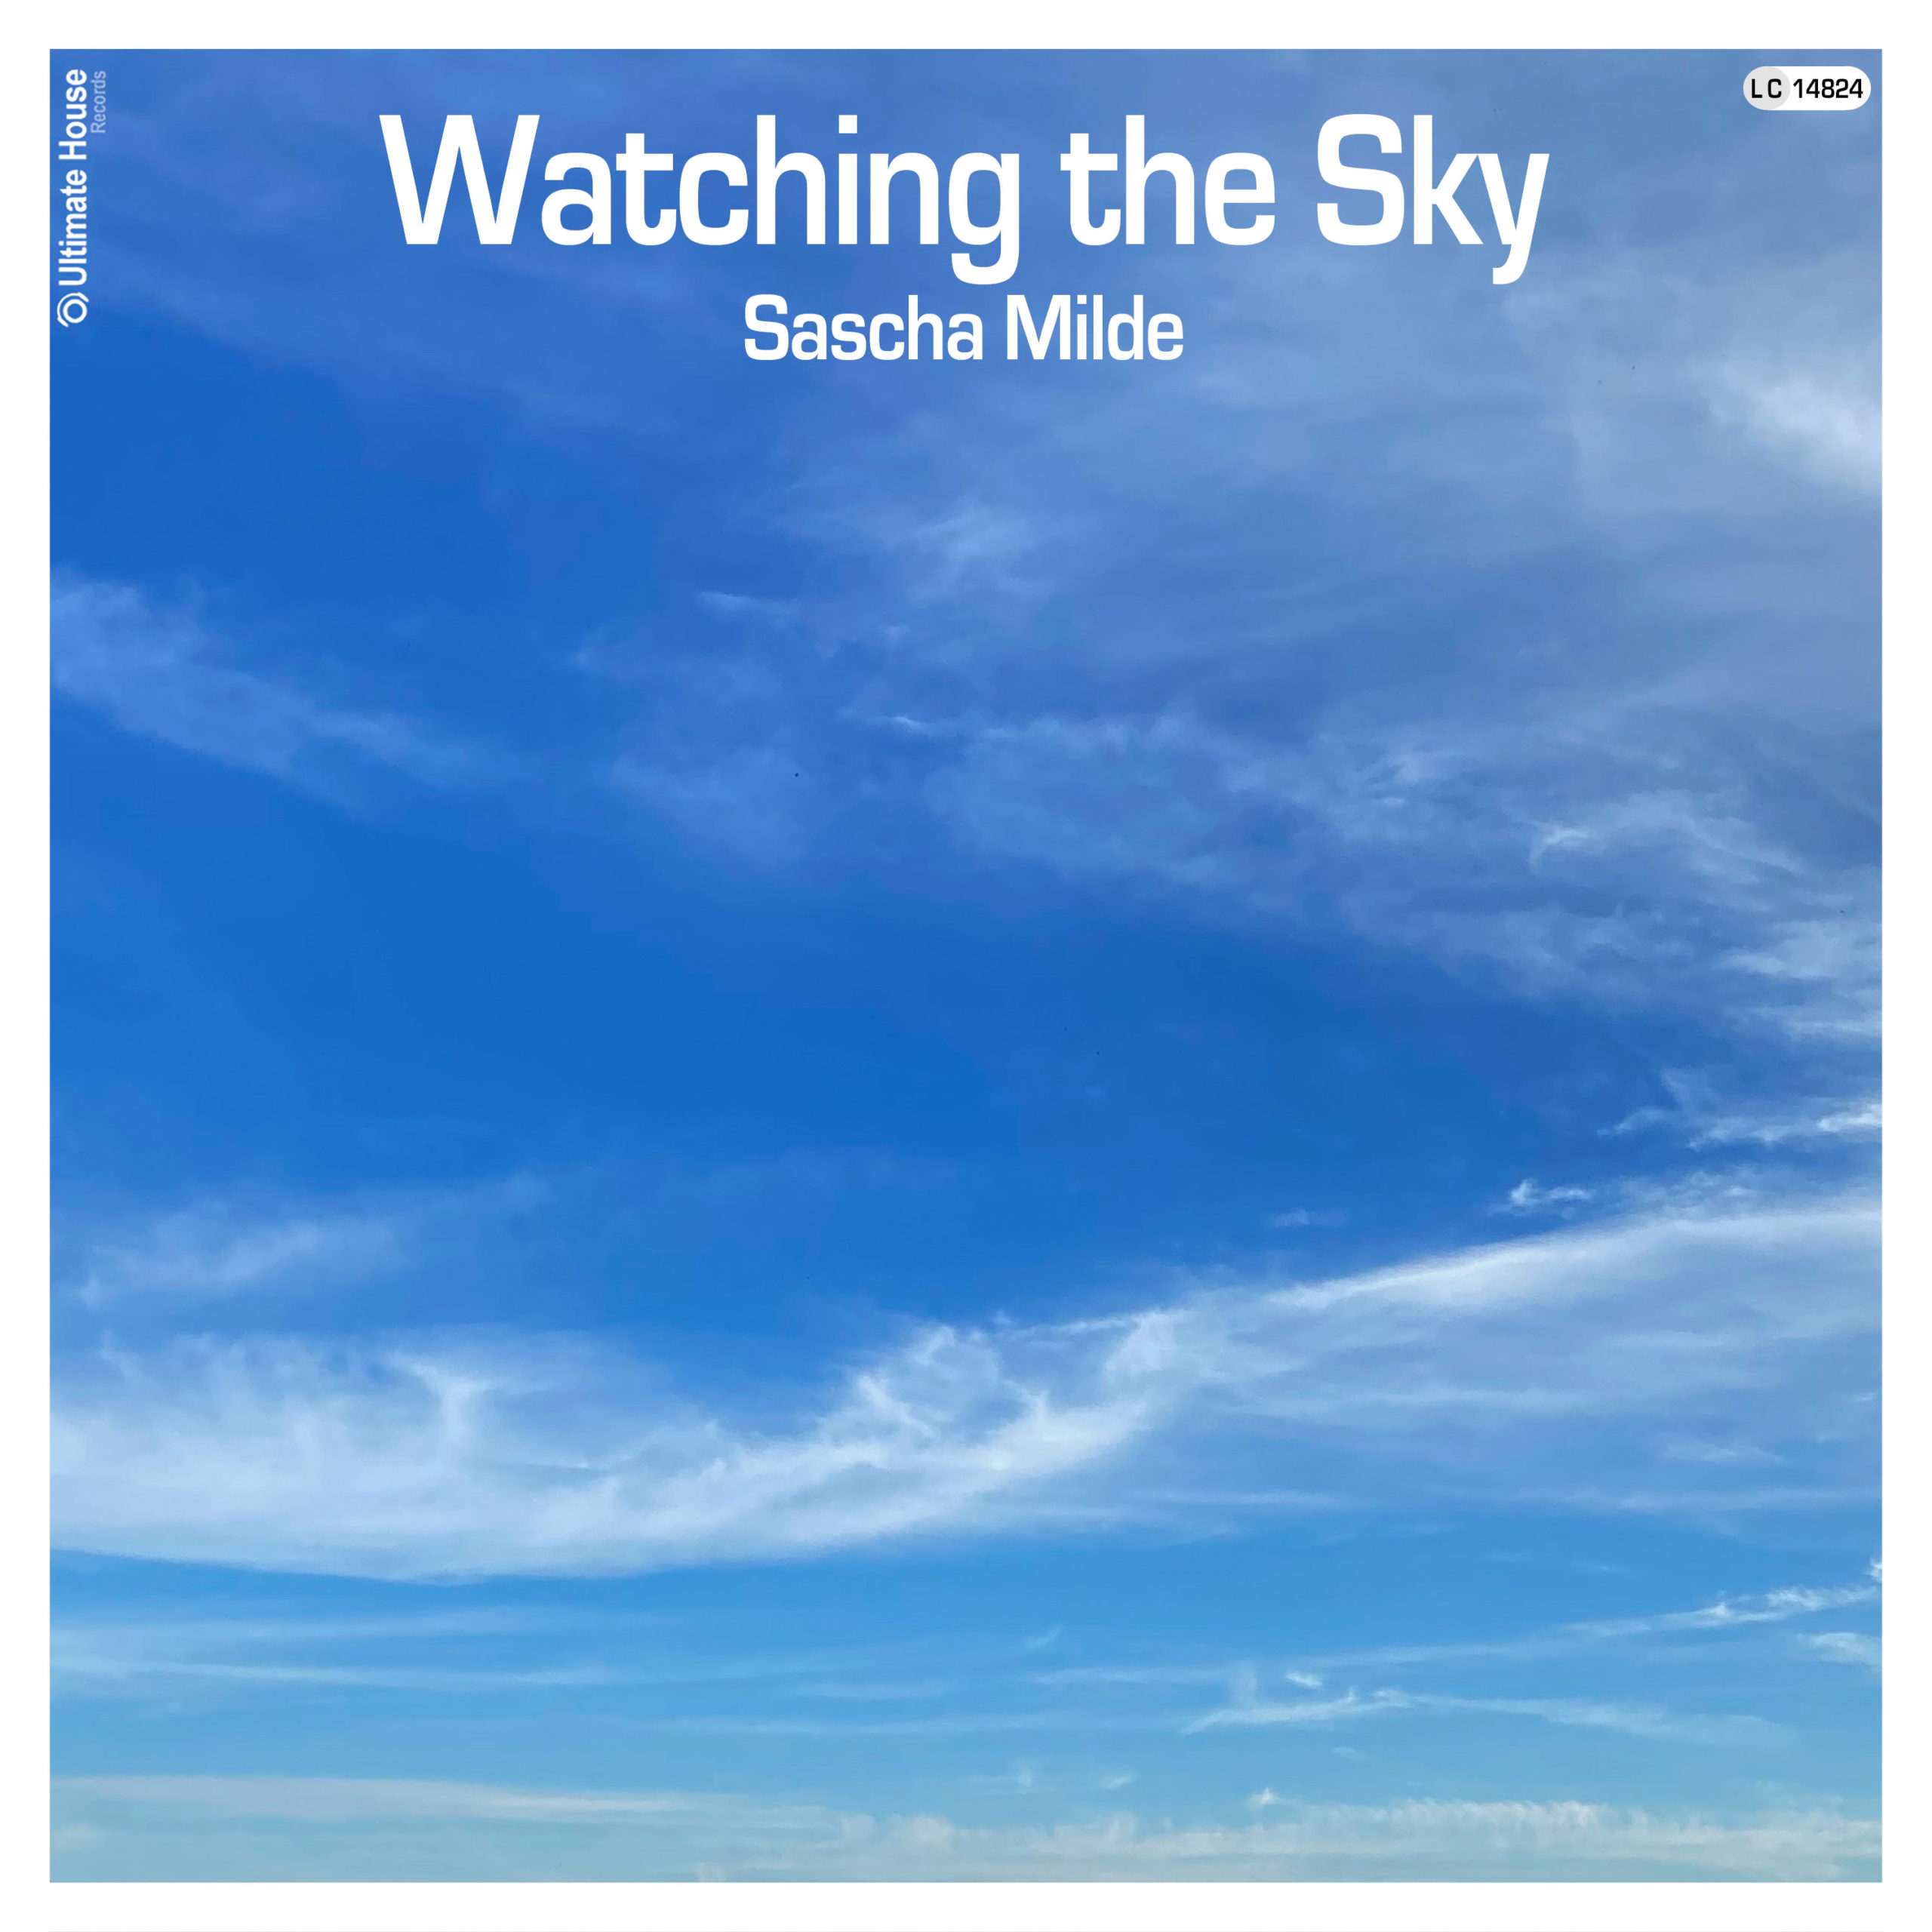 https://www.ultimate-house-records.com/wp-content/uploads/2023/05/174-Sascha_Milde-Watching_the_Sky-Cover_web-scaled.jpg